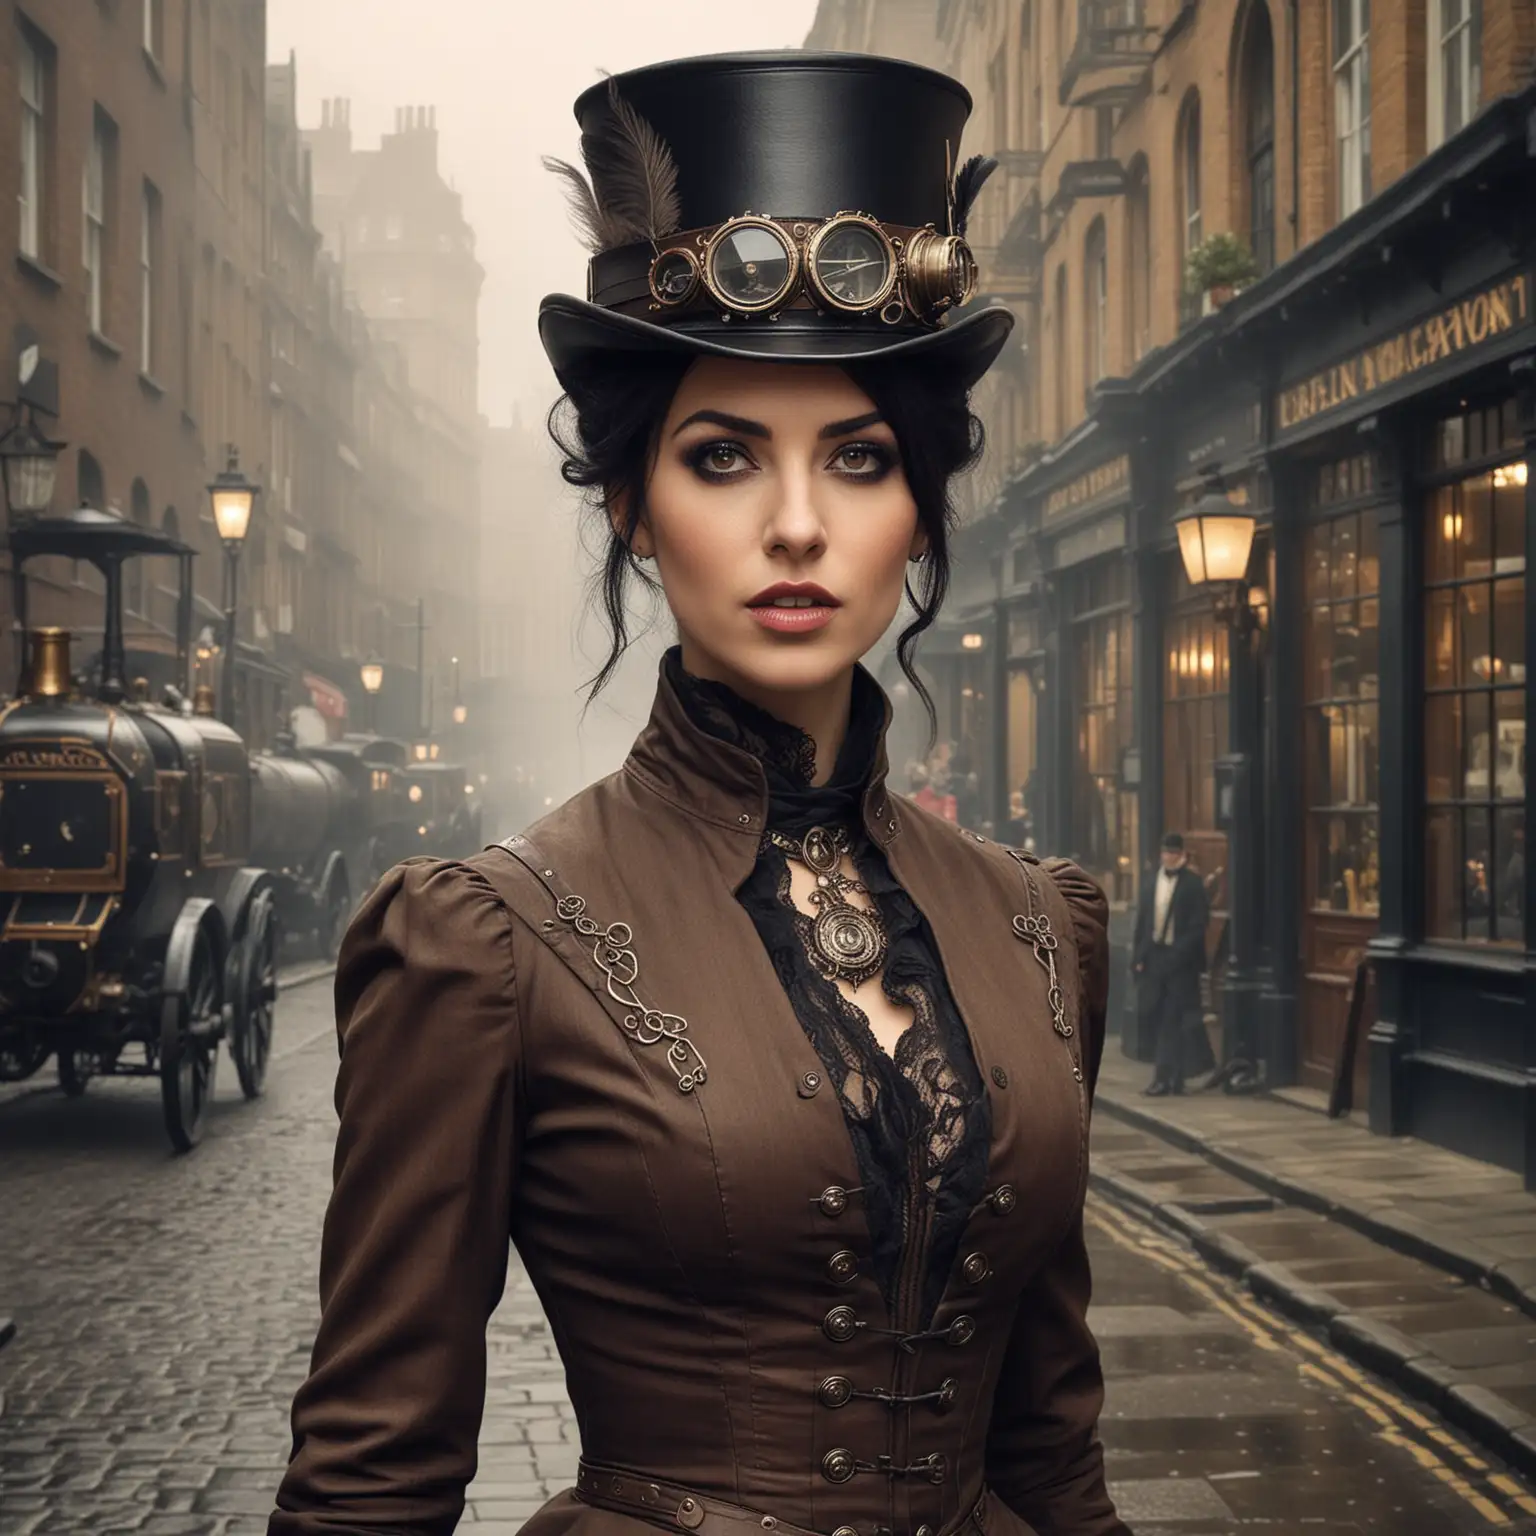 Alexia Tarabotti is a Steampunk Lady aged 35, with a very dour face, exotic, dark olive italian skin, black hair and dark eyes, big eyebrows, wide mouth, strong features. She has a slightly smouldering look. She wears the height of late victorian fashion. She exudes confidence and charisma, wit and determination.
She is stood in the streets of steampunk London and it is a realistic, moody photo